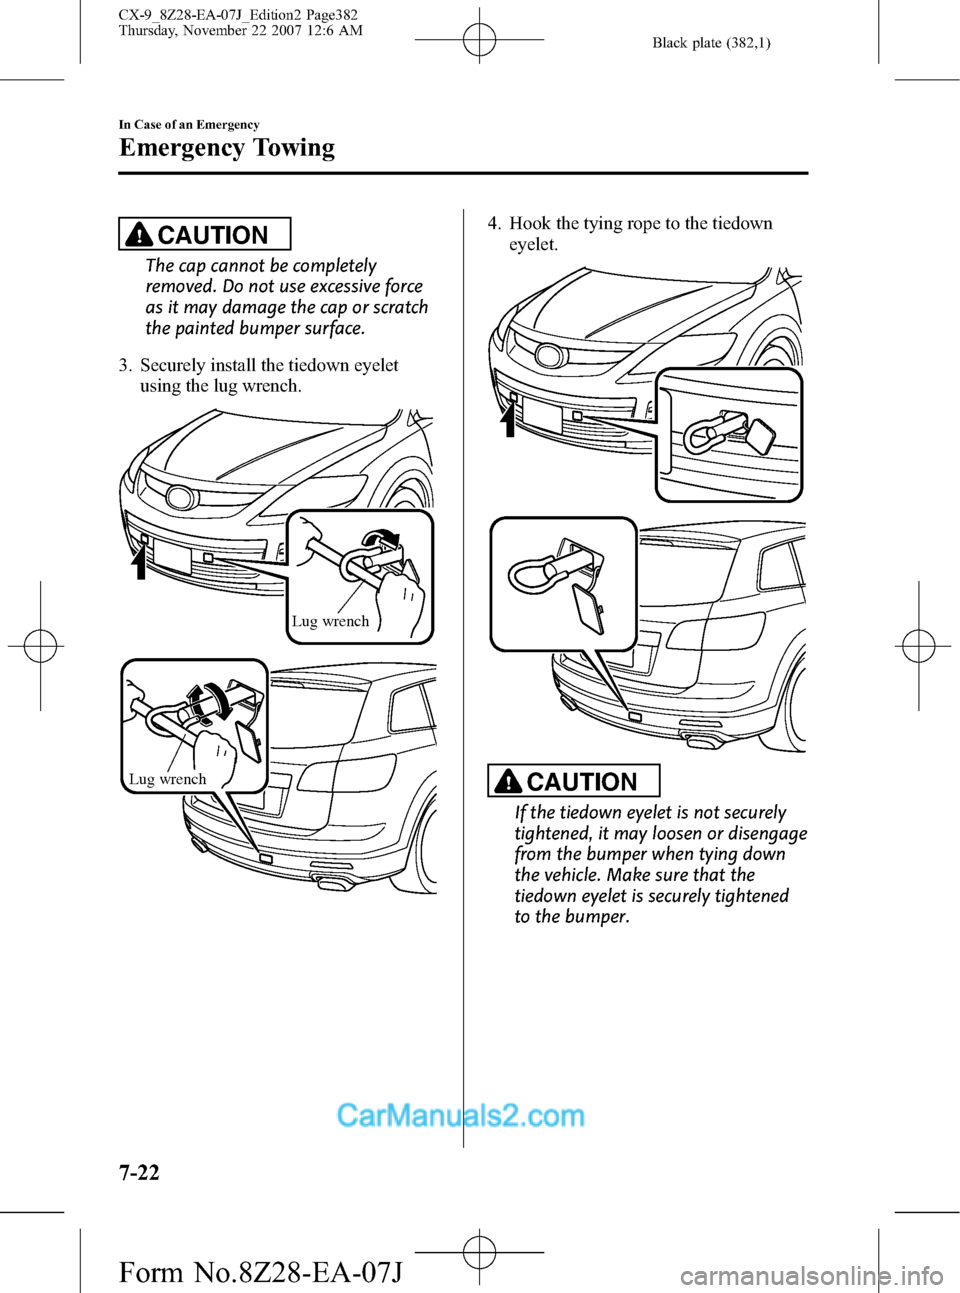 MAZDA MODEL CX-9 2008   (in English) Service Manual Black plate (382,1)
CAUTION
The cap cannot be completely
removed. Do not use excessive force
as it may damage the cap or scratch
the painted bumper surface.
3. Securely install the tiedown eyelet
usin